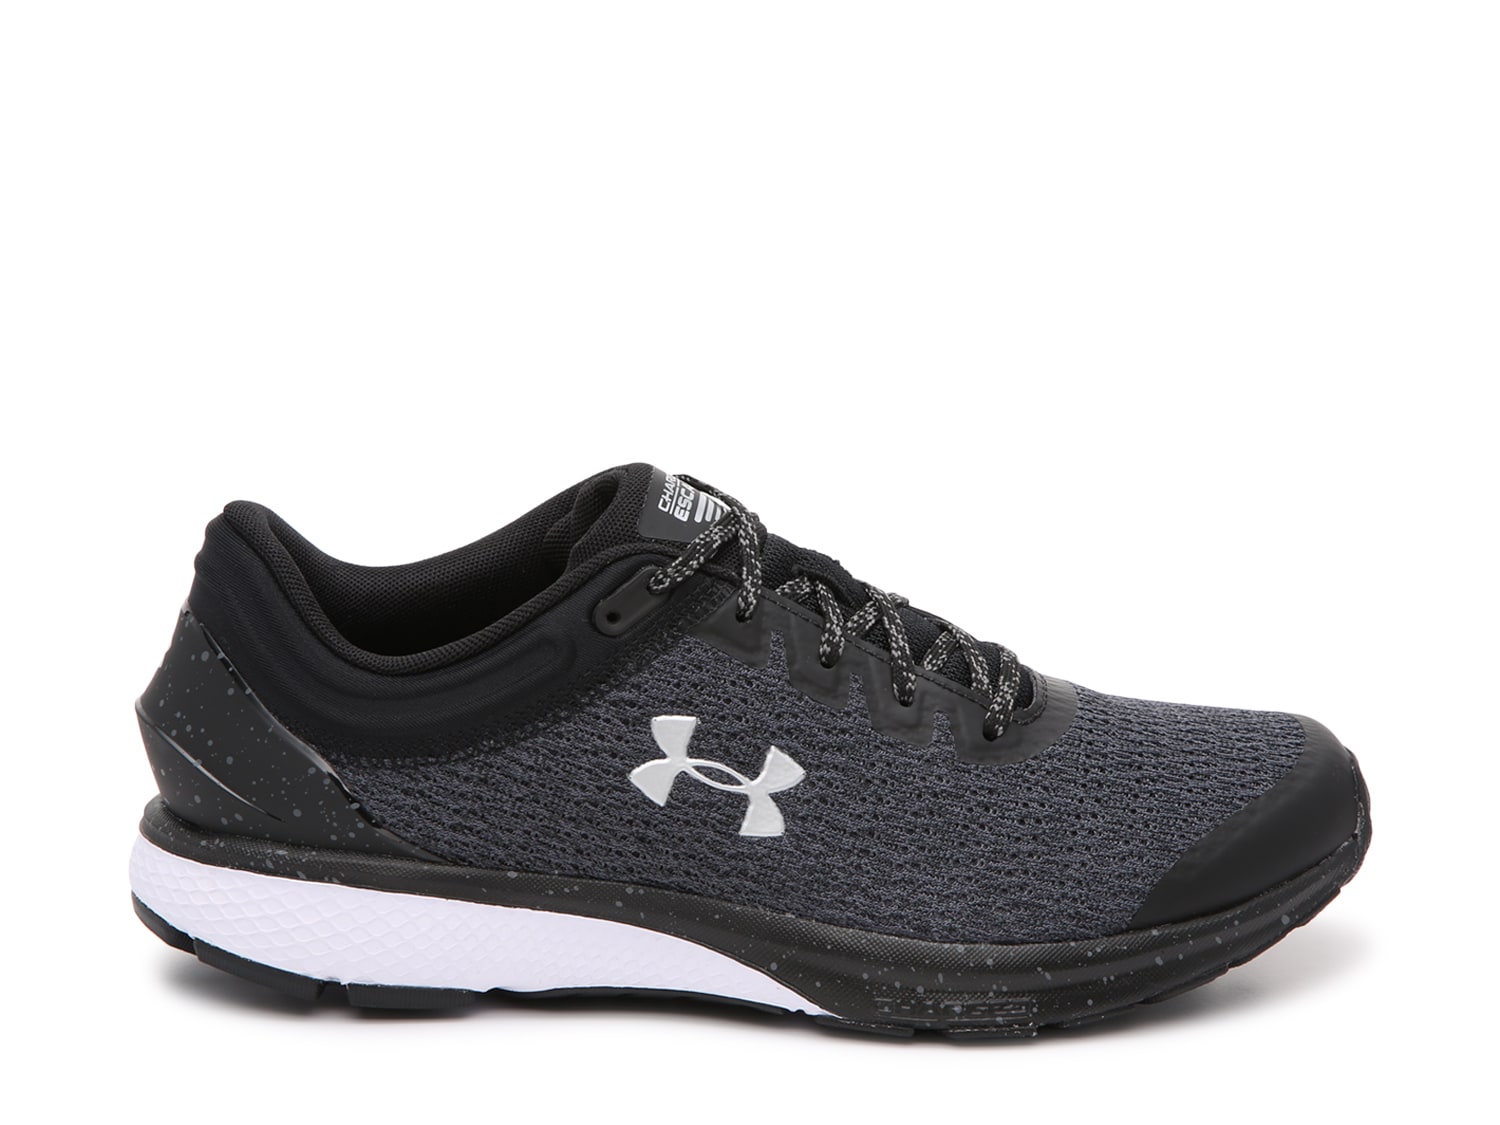 women's charged escape running shoe